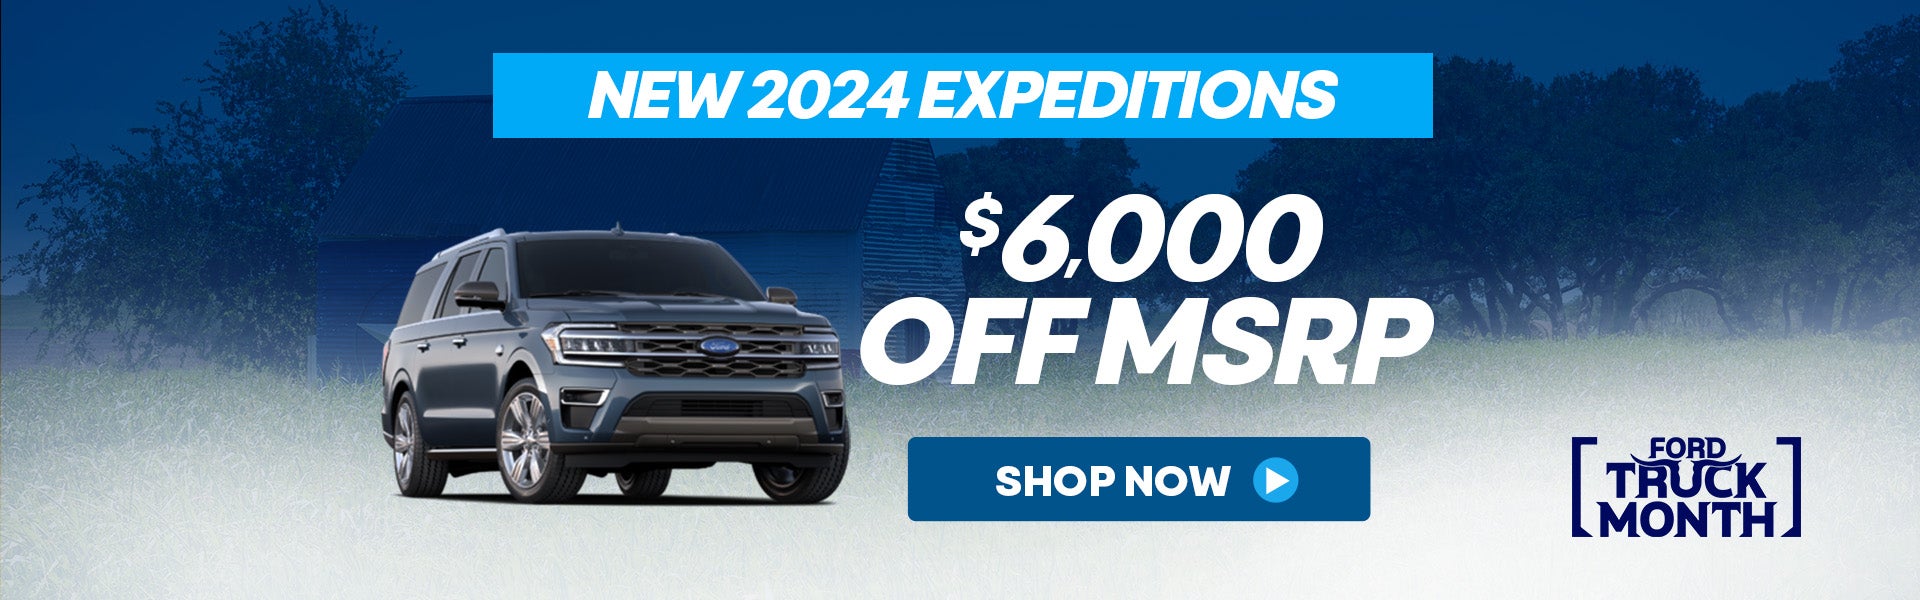 New Ford Expedition Specials Near Me in Rosenberg, TX